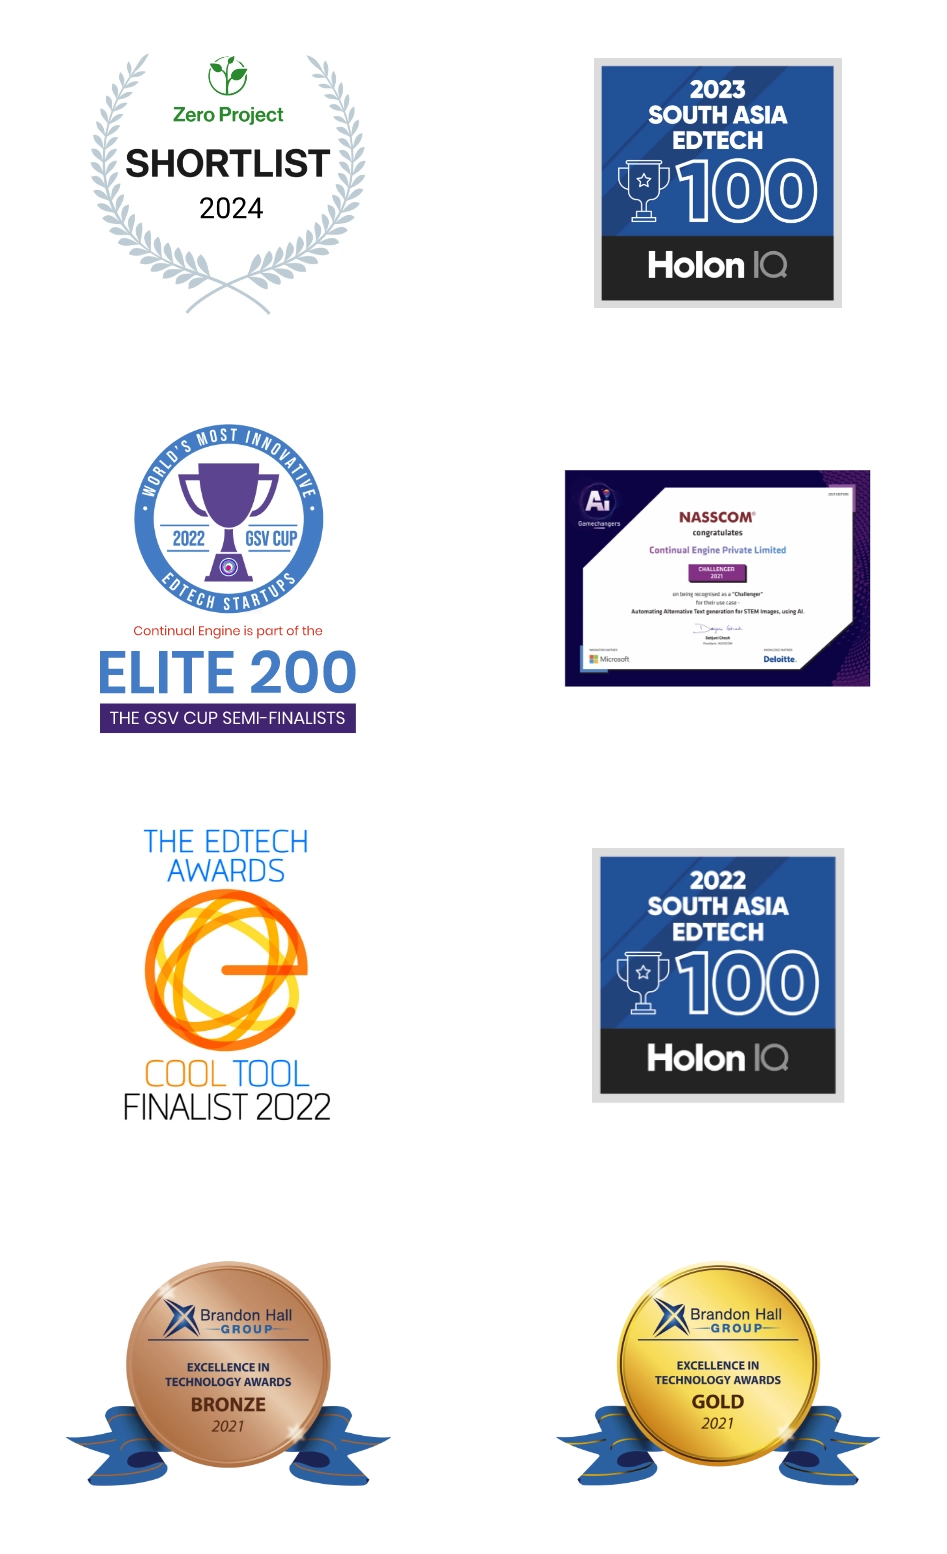 The figure illustrates the following eight achievements of Continual Engine: Zero Project Shortlist 2024. 2023 South Asia Ed Tech, 100 Holon I Q. World's most innovative Ed Tech Startups, 2022, G S V Cup, Continual Engine is part of the ELITE 200, The G S V Cup semi-finalists. A NASSCOM Certificate. The Ed Tech Awards, Cool Tool Finalist, 2022. 2022 South Asia Ed Tech 100, Holon I Q. A Bronze medal: Brandon Hall Group, Excellence in Technology Awards, 2021. A Gold Medal: Brandon Hall Group, Excellence in Technology Awards, 2021.